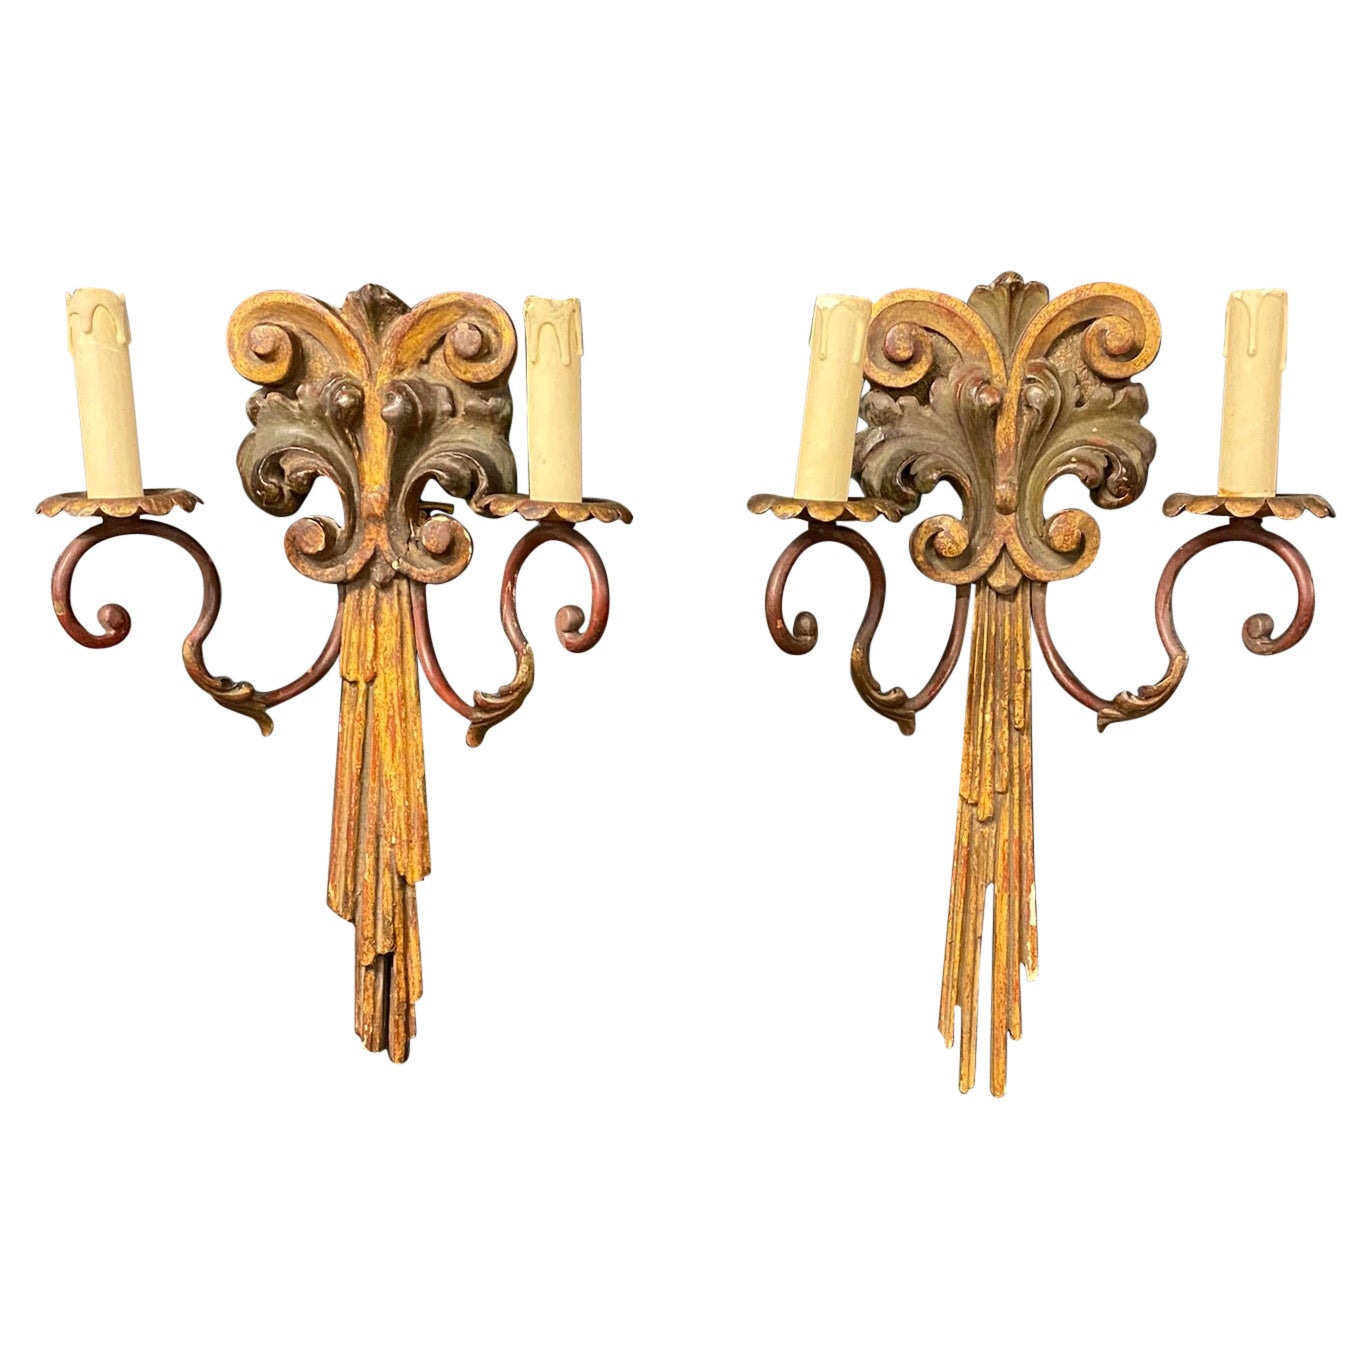 Pair of Old Wall Lights in Polychrome Wood and Wrought Iron circa 1950